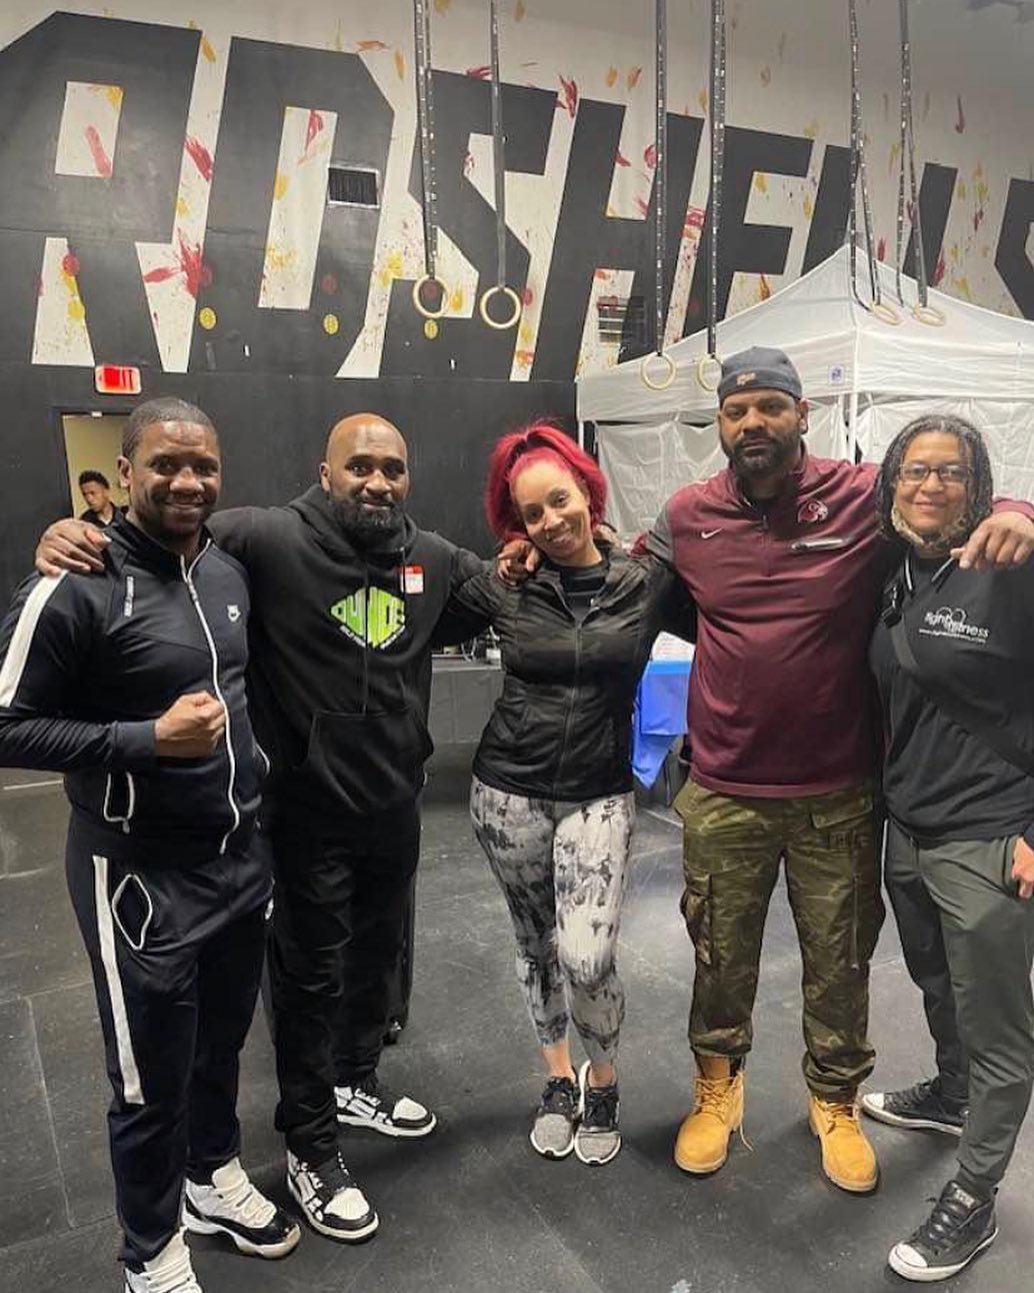 Swing Into Spring amateur boxing event leadership #dreamteam @geromequigleyjr @andrew.council.16 @oxonhillboxing @fightn2fitness. Another successful event in the books champs. Our #collab portfolio is just beginning to be written. #staytuned